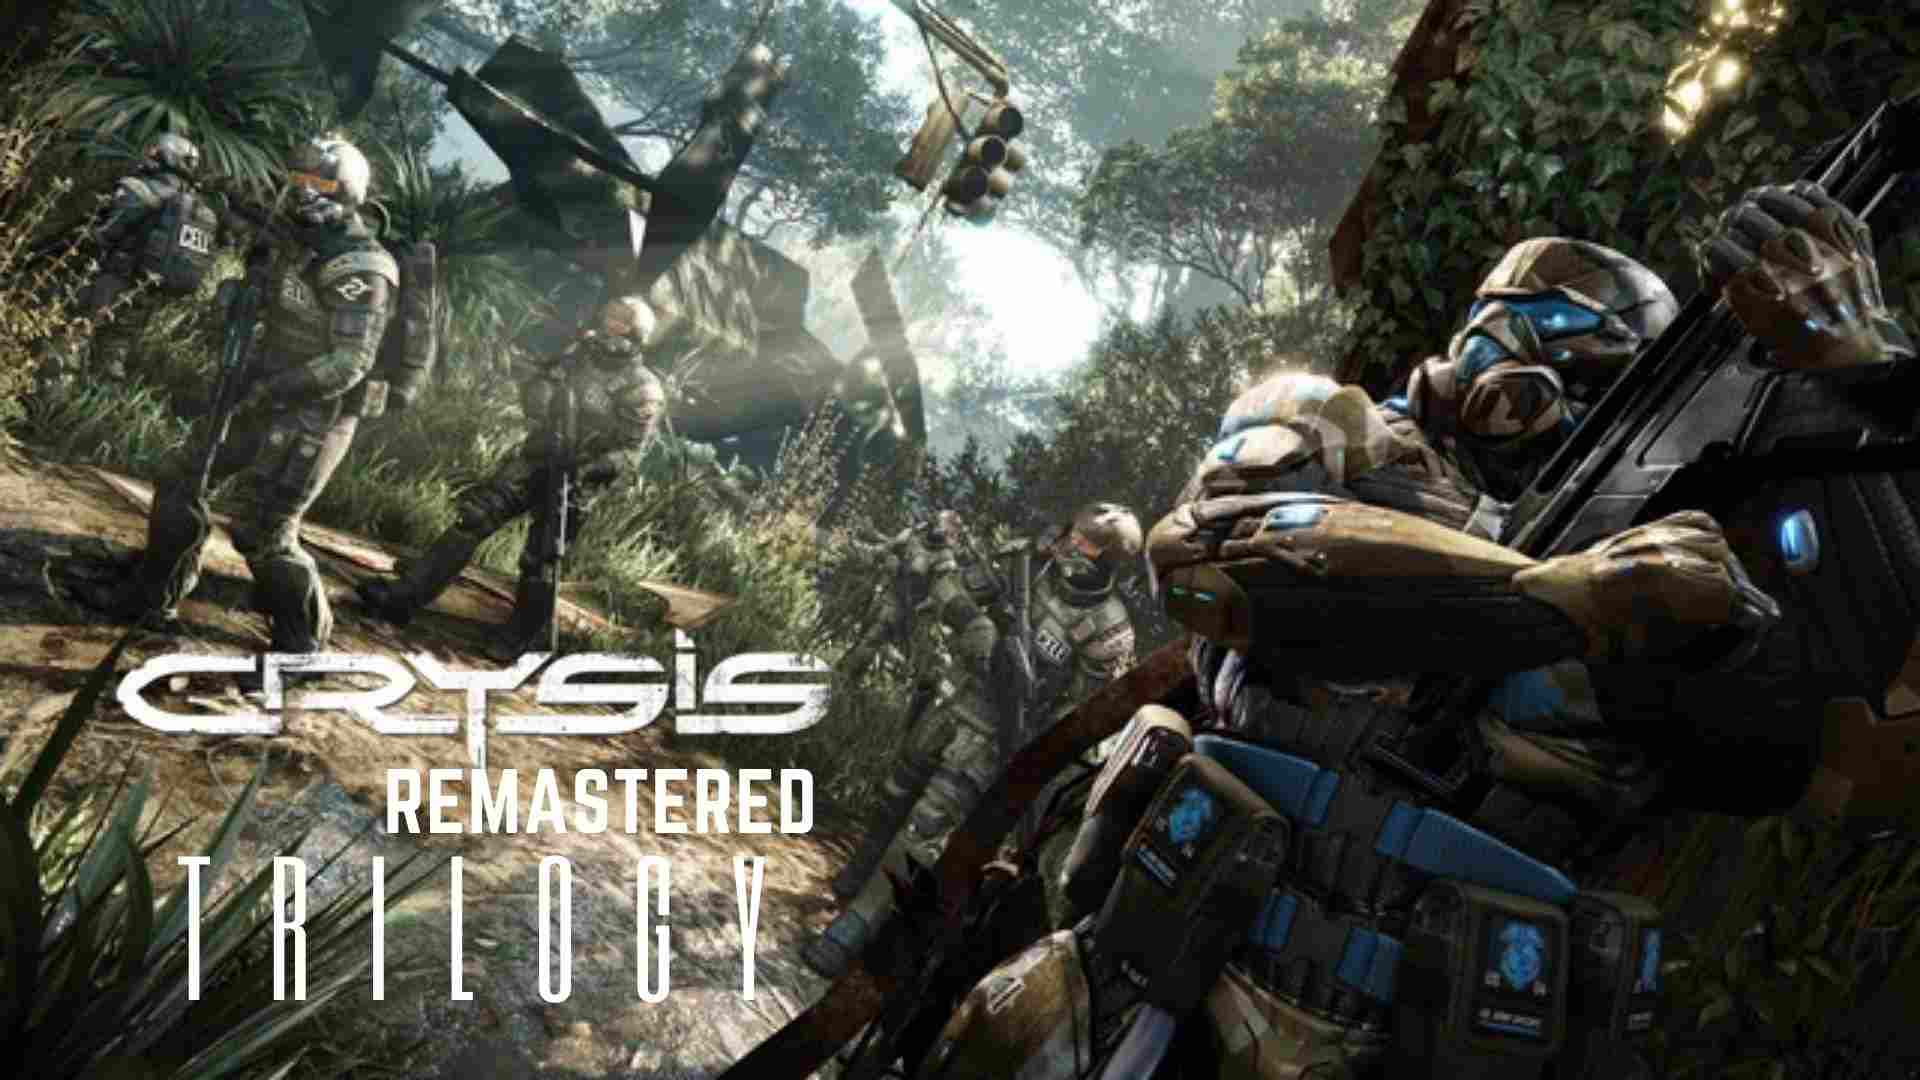 Crysis Remastered Trilogy Age Rating and Parents Guide | 2021